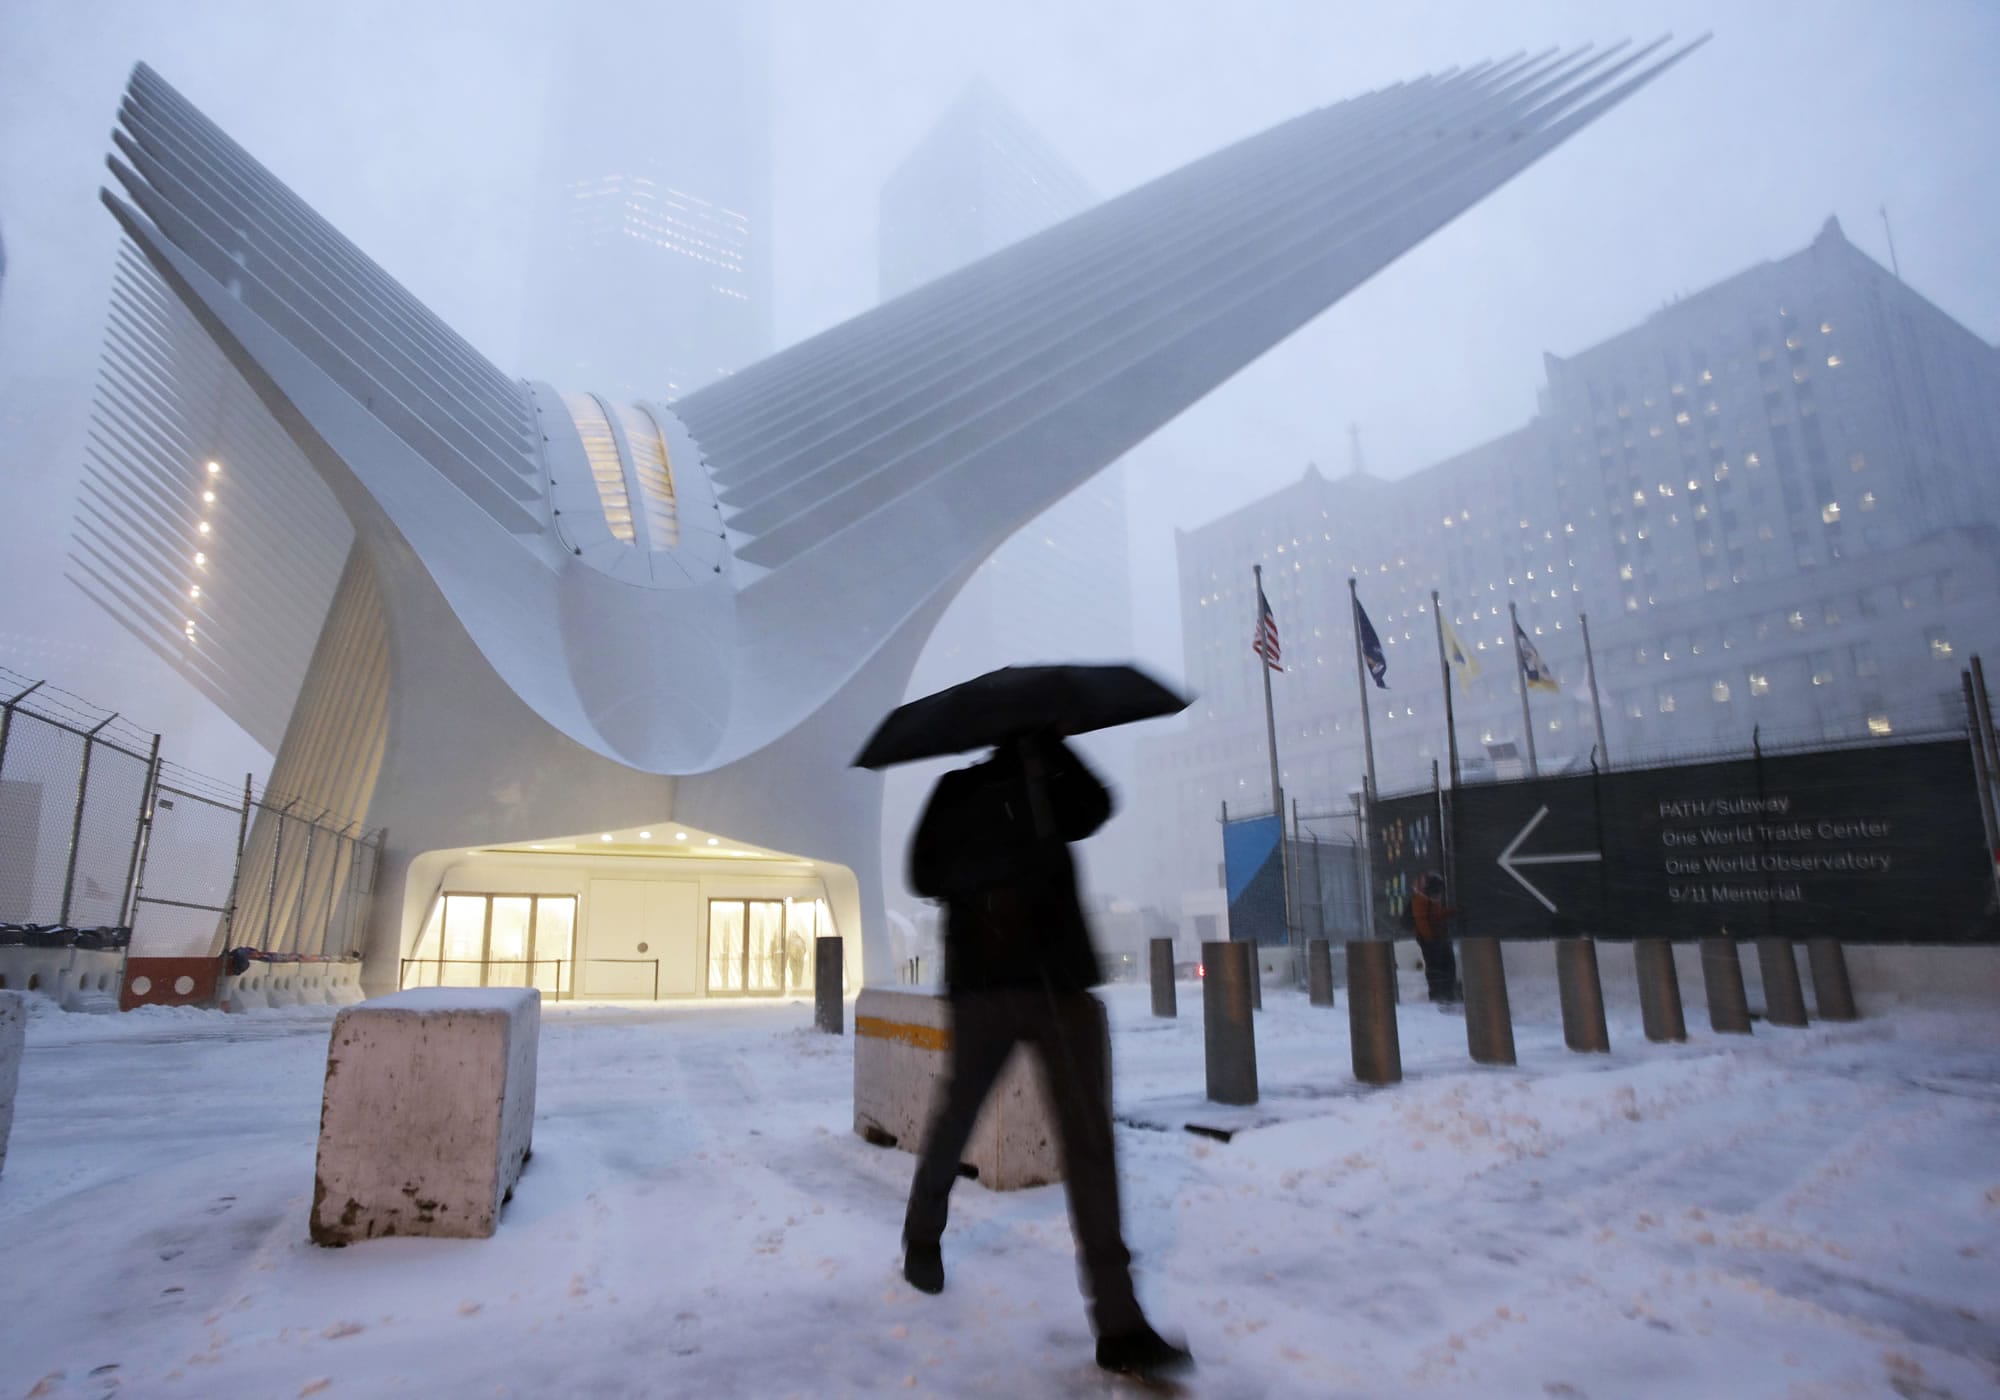 A man makes his way through wind and snow past the Oculus of the World Trade Center Transportation Hub, Thursday, Feb. 9, 2017, in New York. A powerful, fast-moving storm swept through the northeastern U.S. Thursday, making for a slippery morning commute and leaving some residents bracing for blizzard conditions.